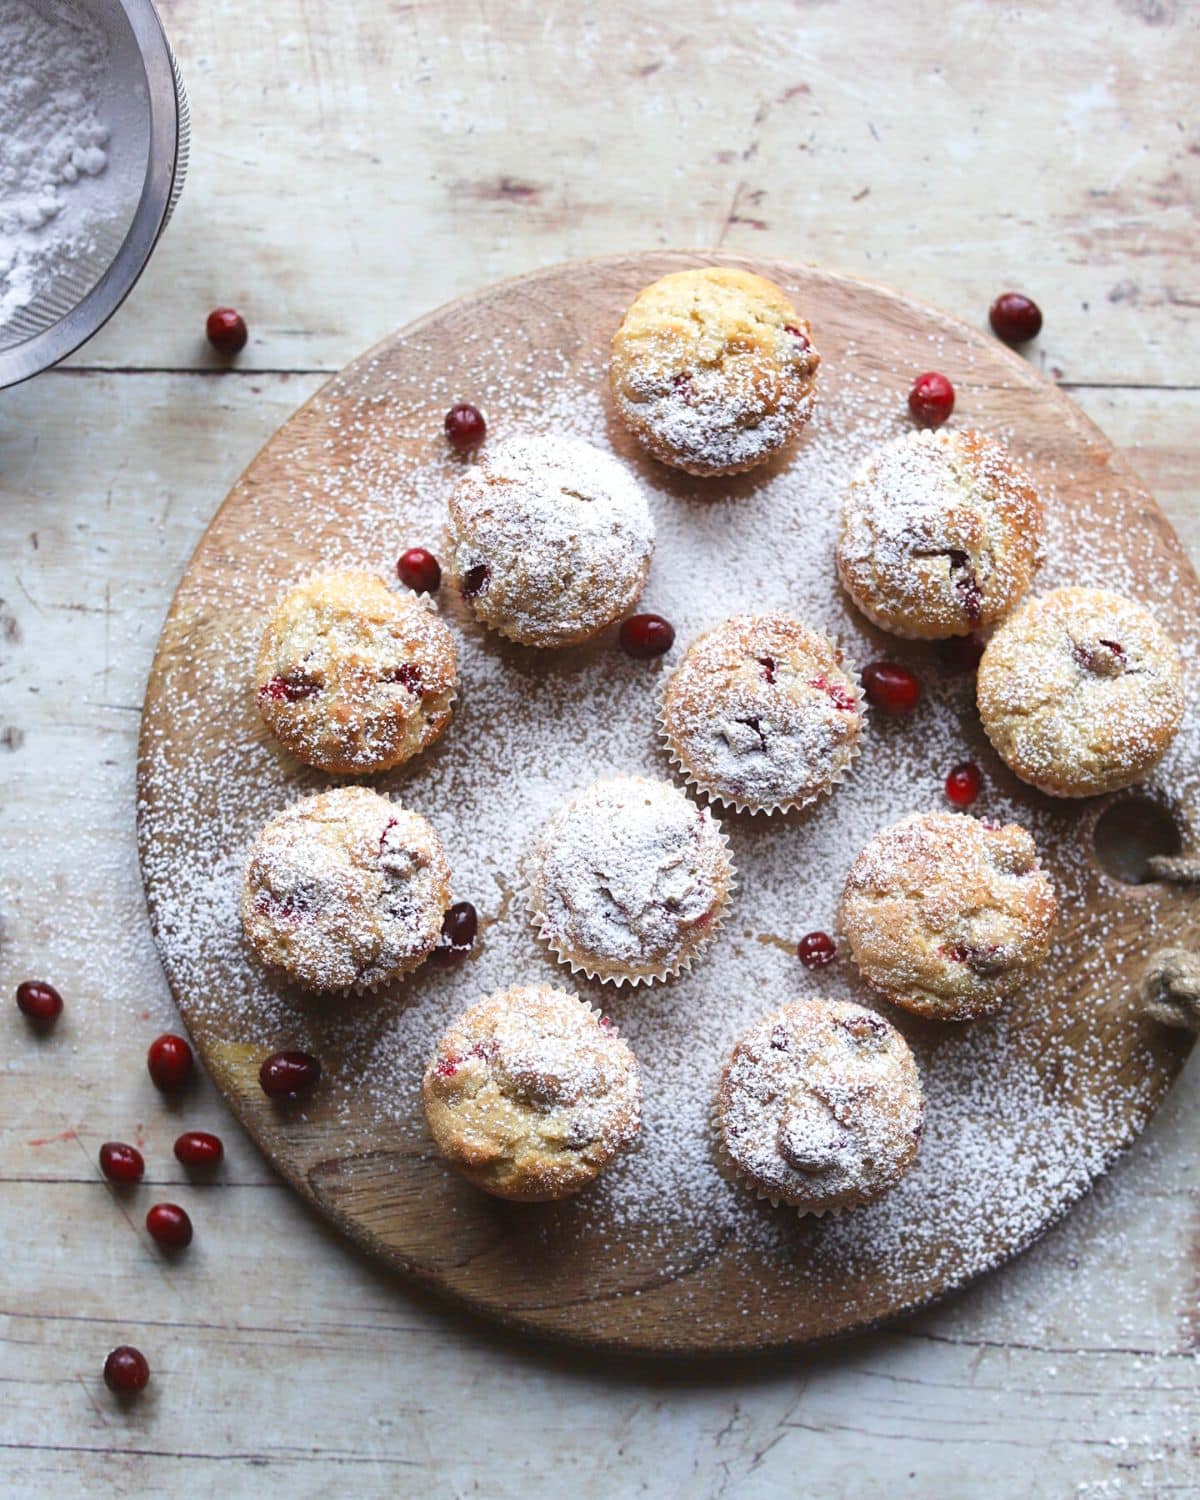 Cranberry muffins on wooden tray dusted with powdered sugar seen from above.